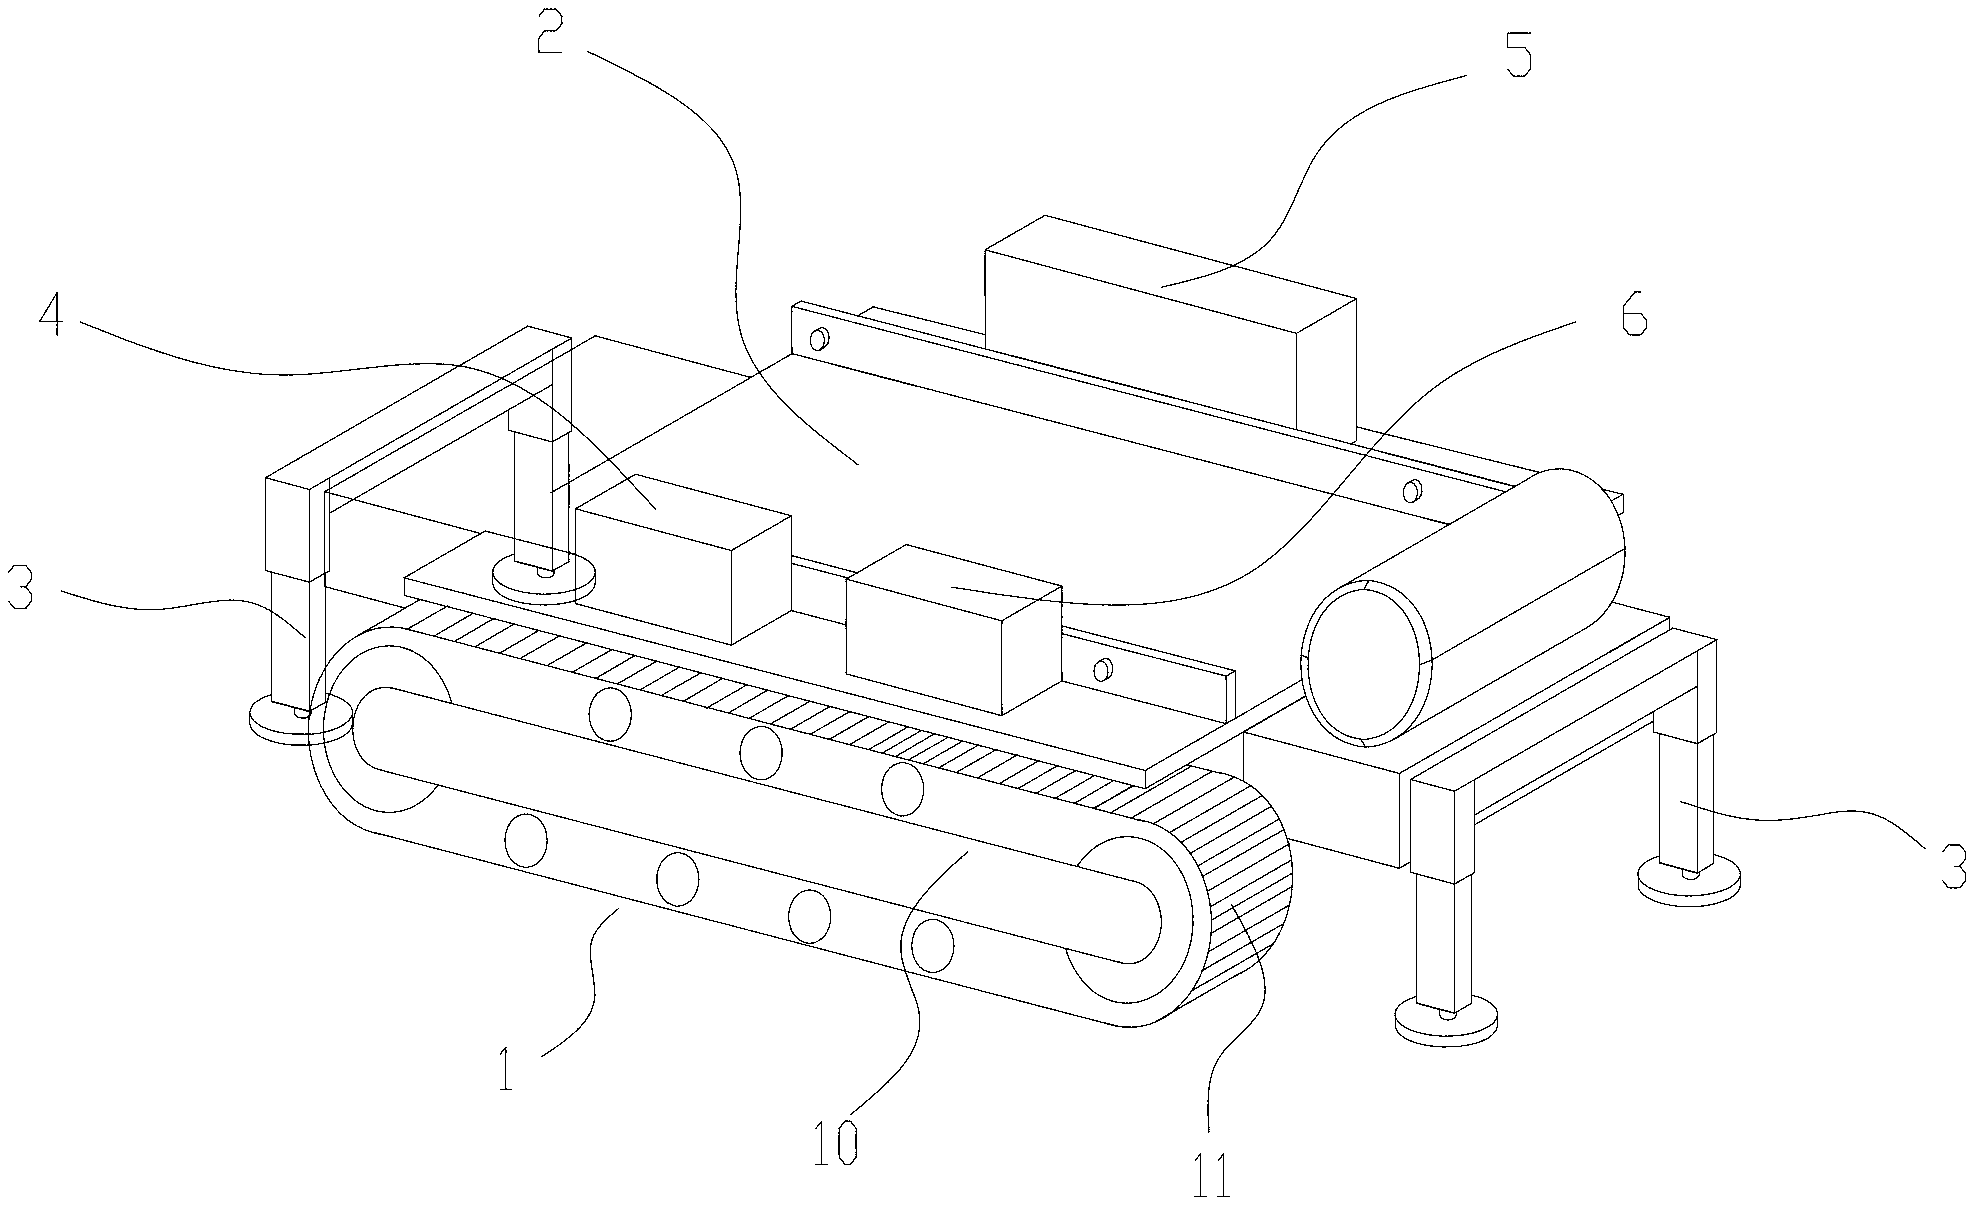 Carrier trolley device for live cleaning system